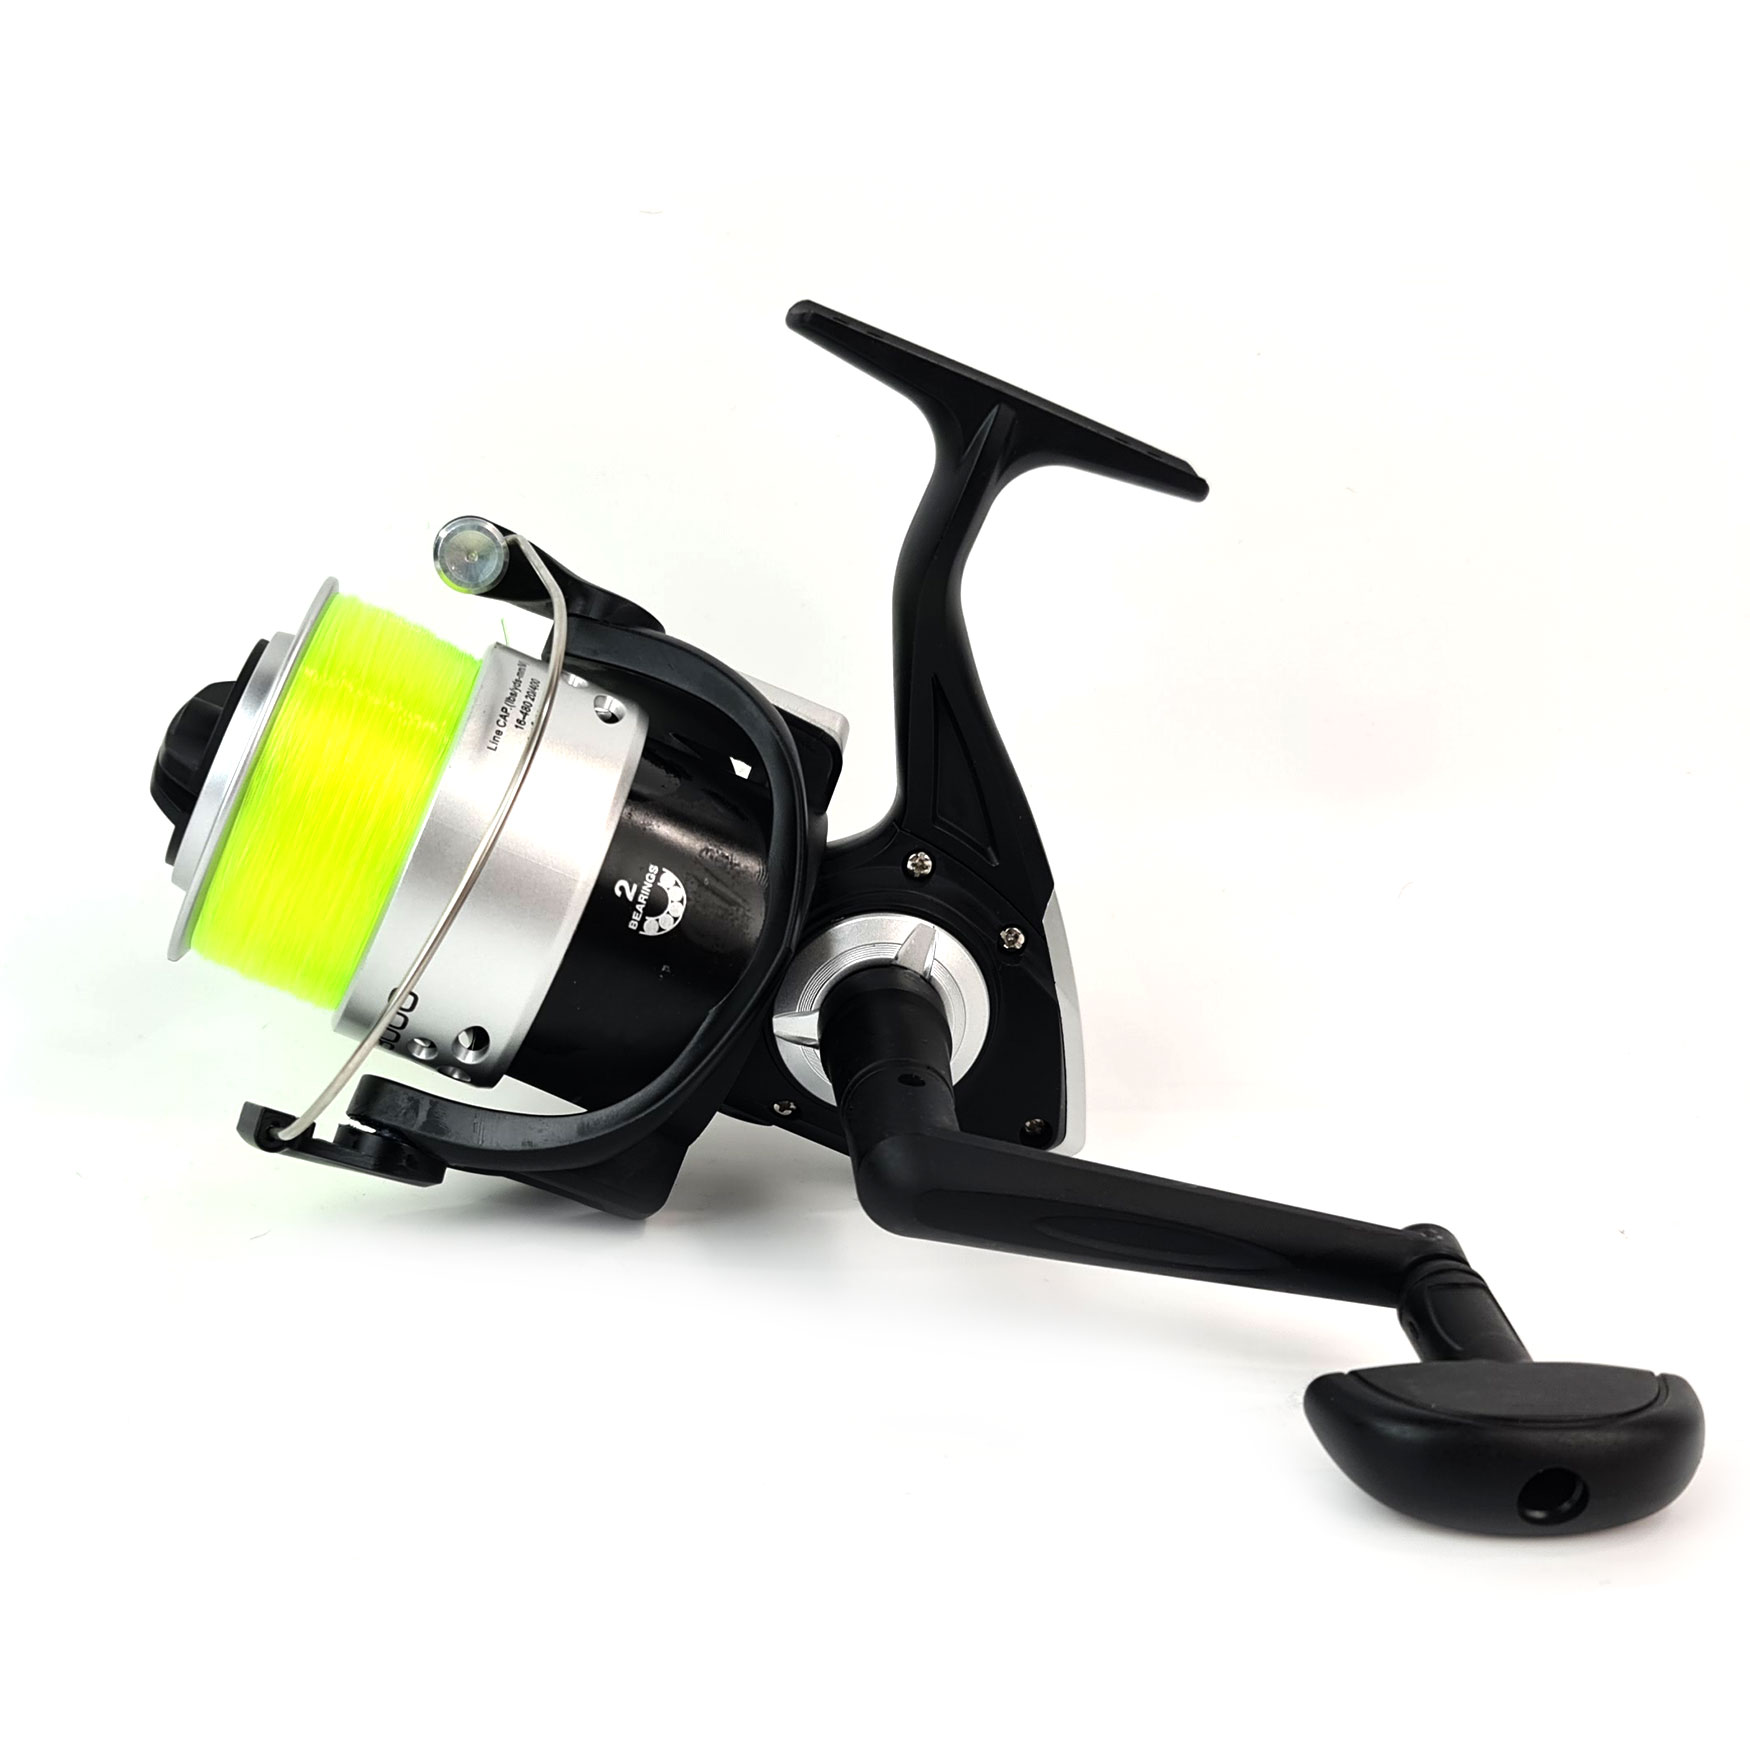 Fisheagle Q8 Surf Reel Loaded with Mono Size: 8000 – Glasgow